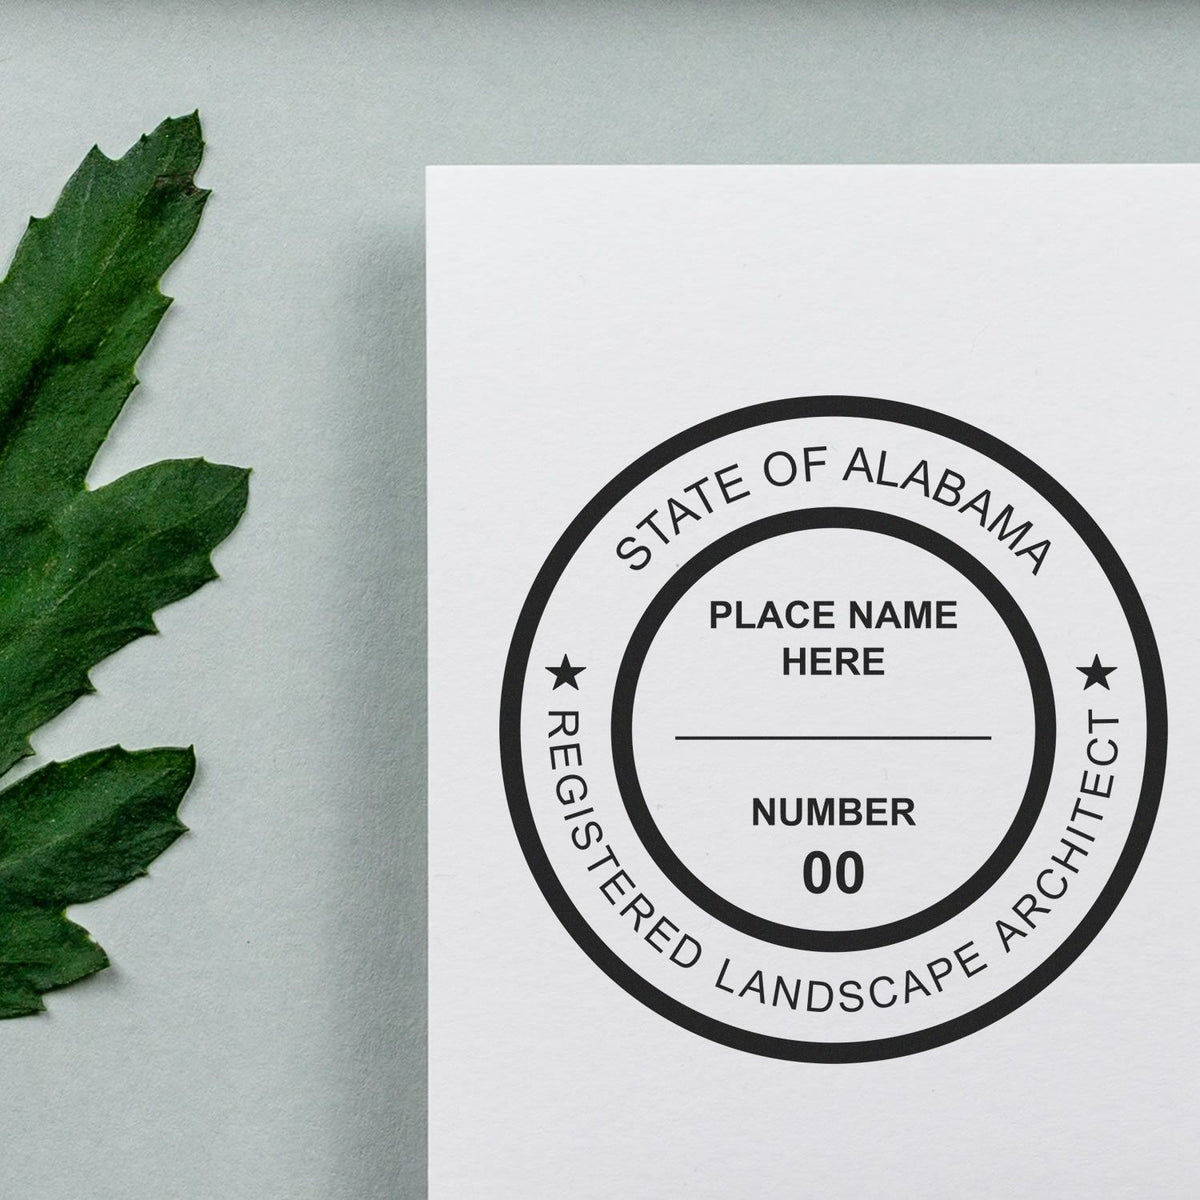 A stamped impression of the Digital Alabama Landscape Architect Stamp in this stylish lifestyle photo, setting the tone for a unique and personalized product.